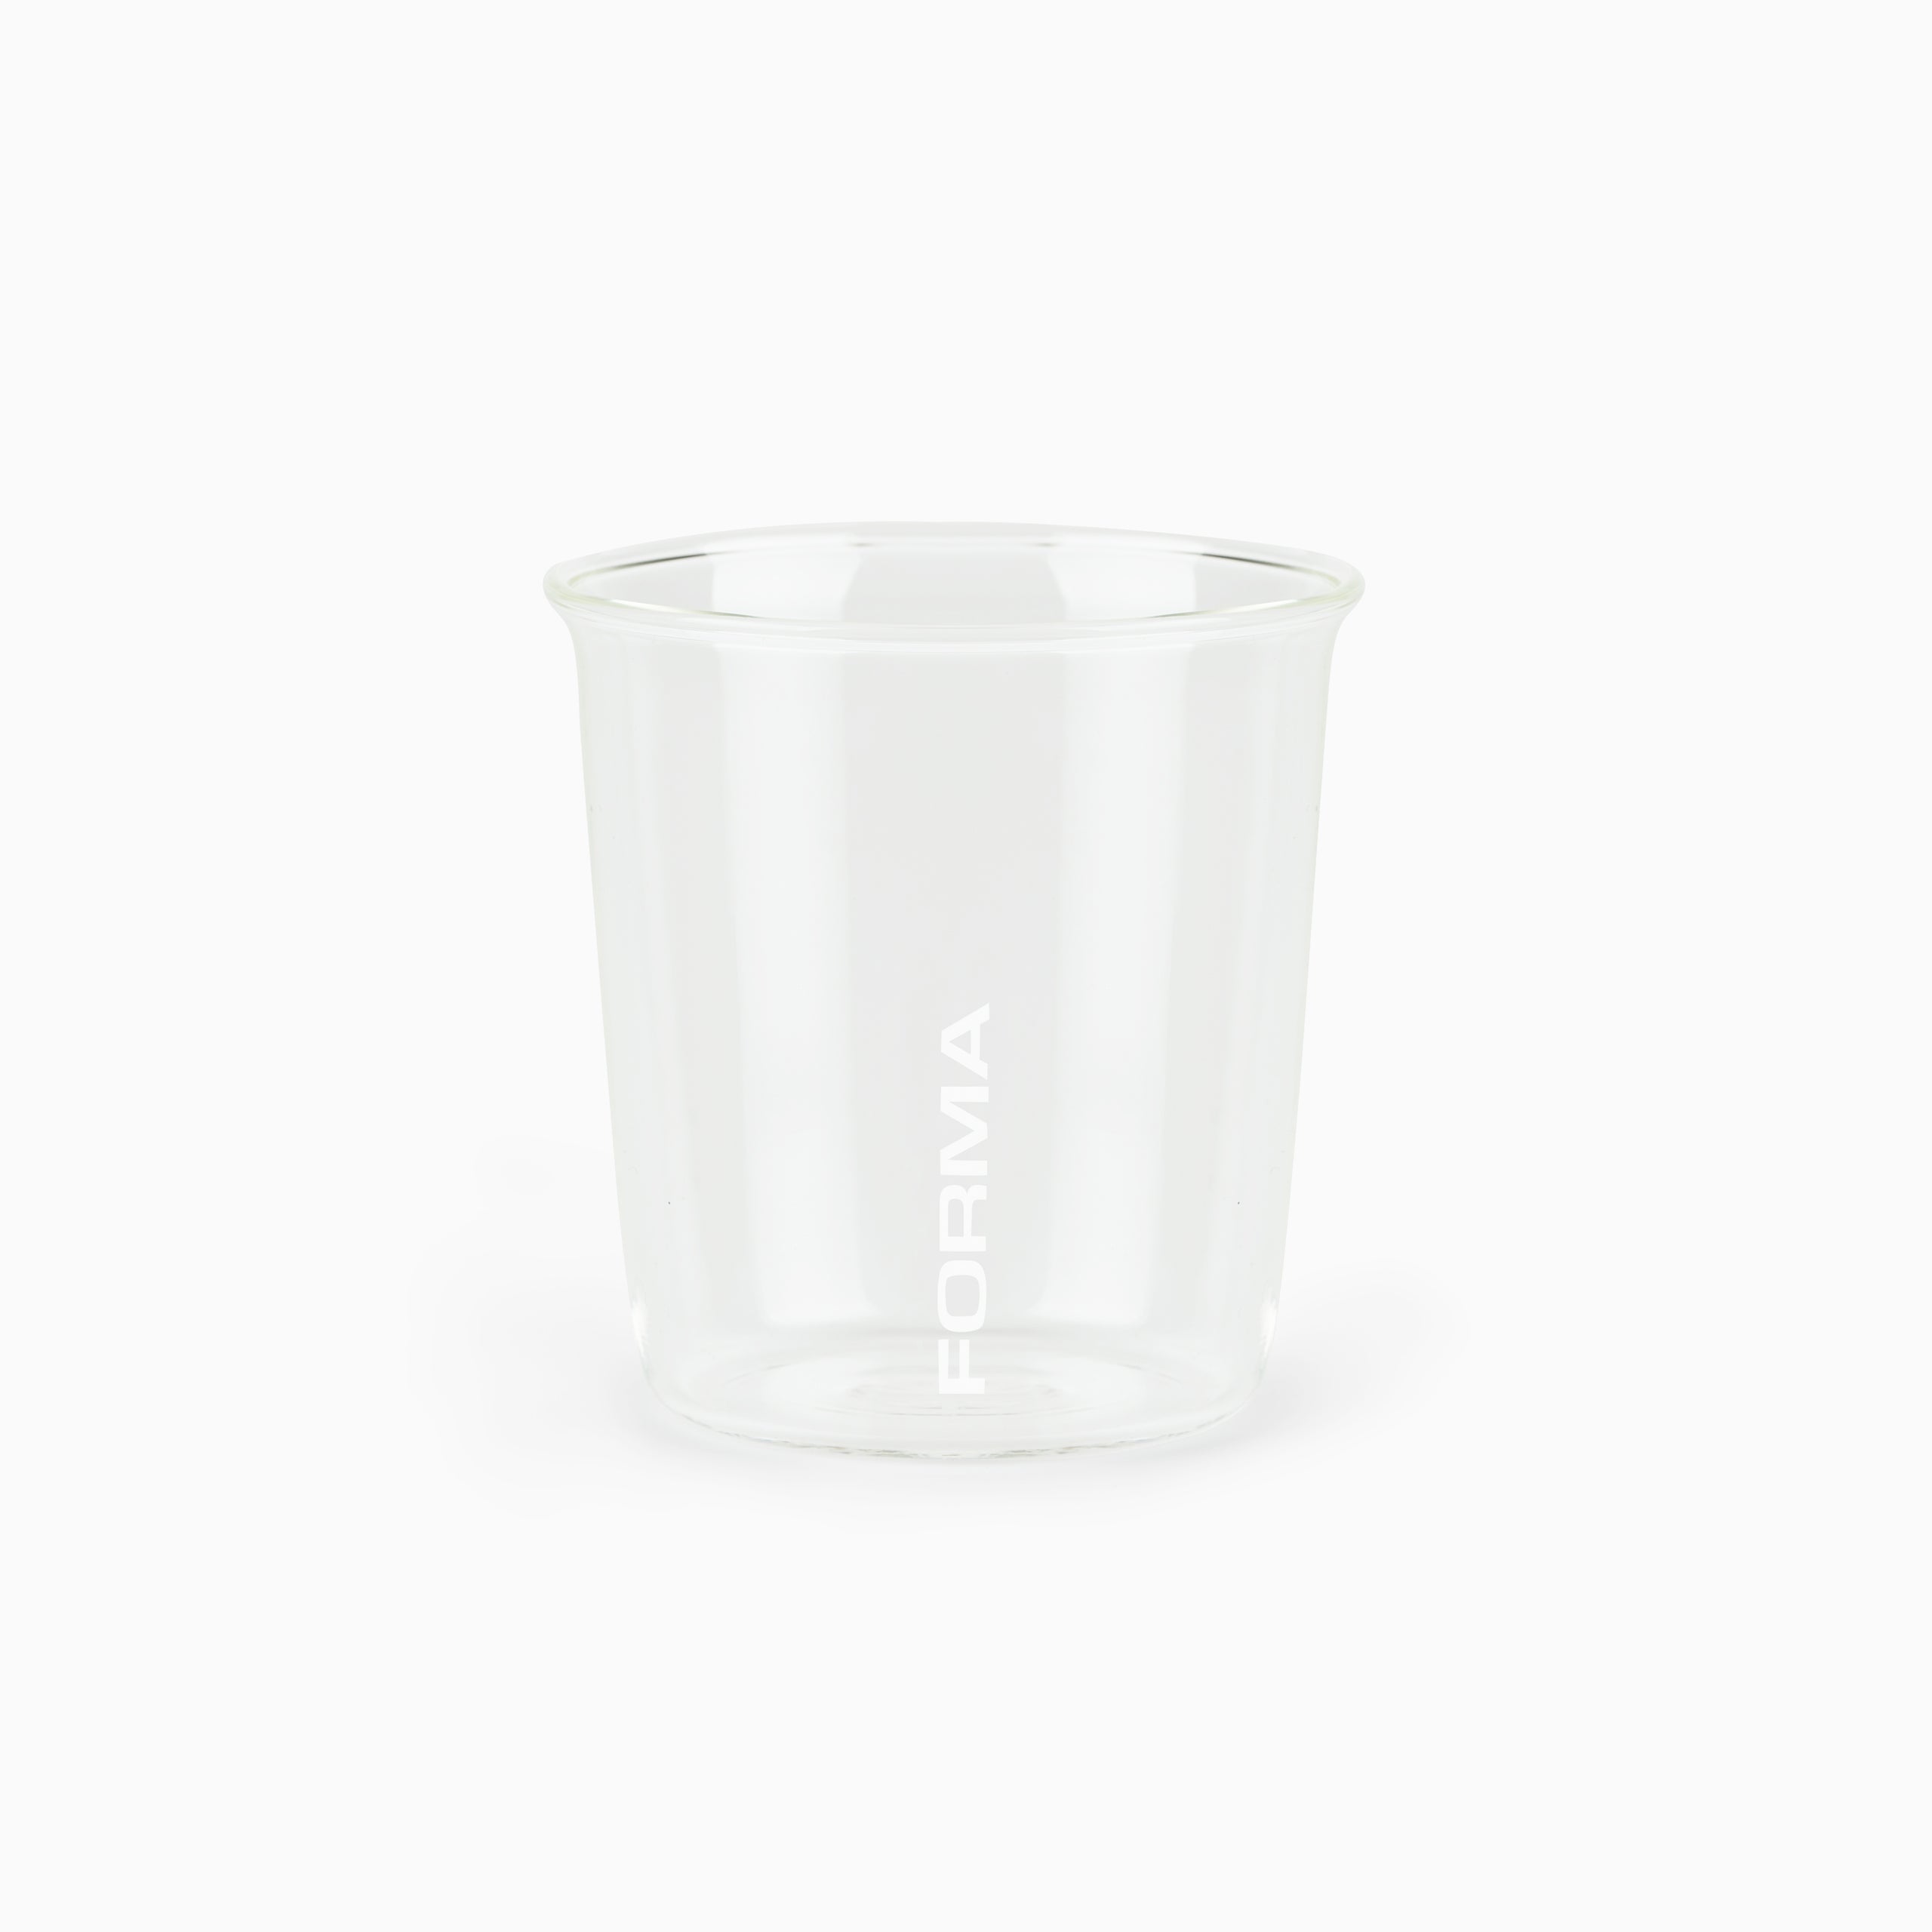 Kinto cast water glasses